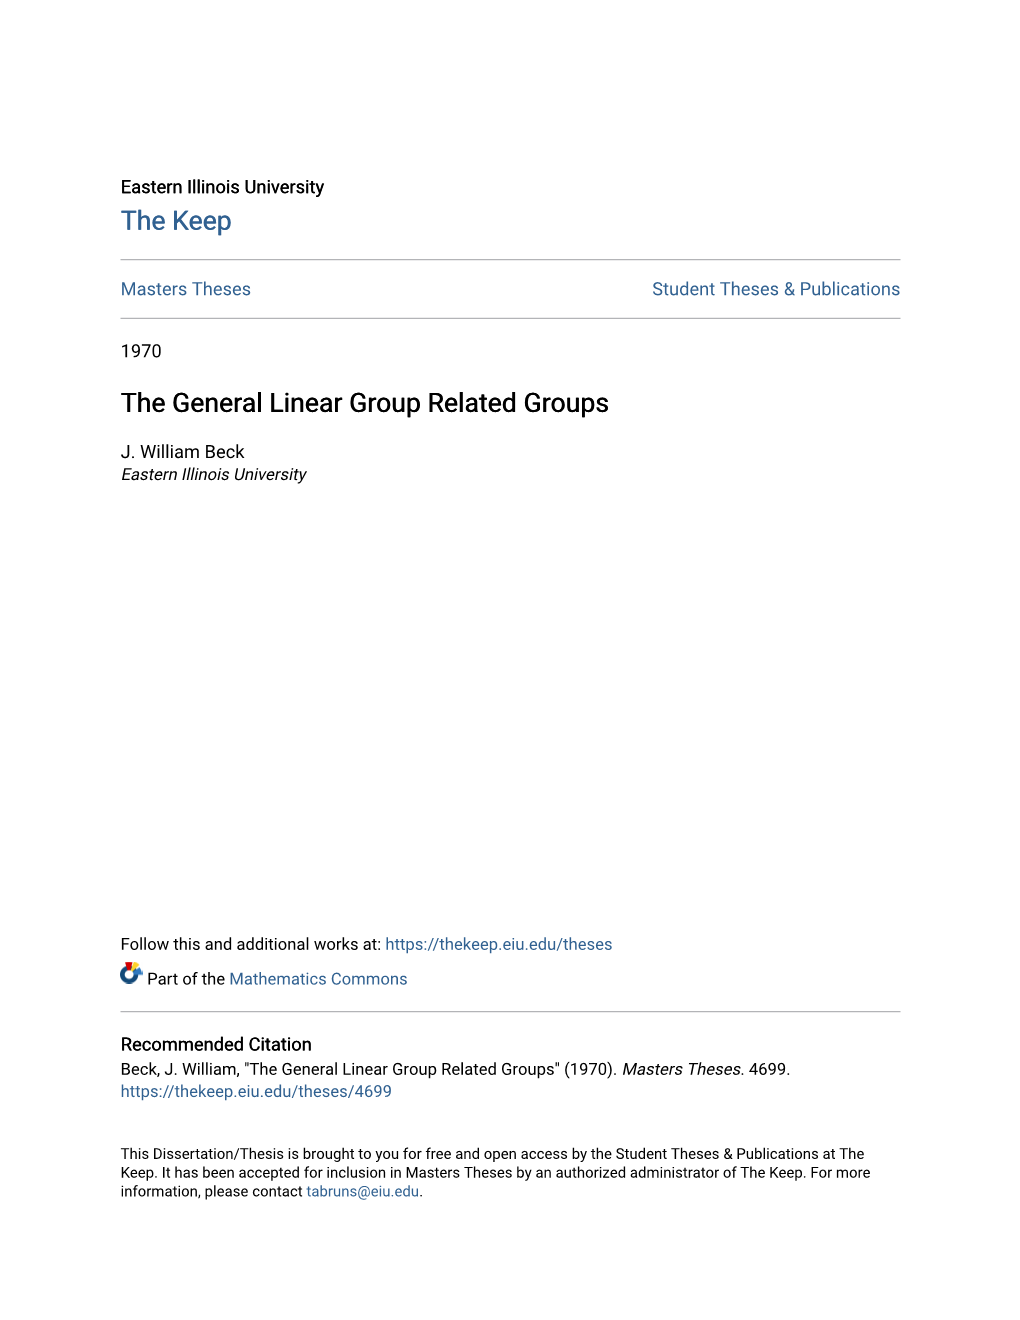 The General Linear Group Related Groups